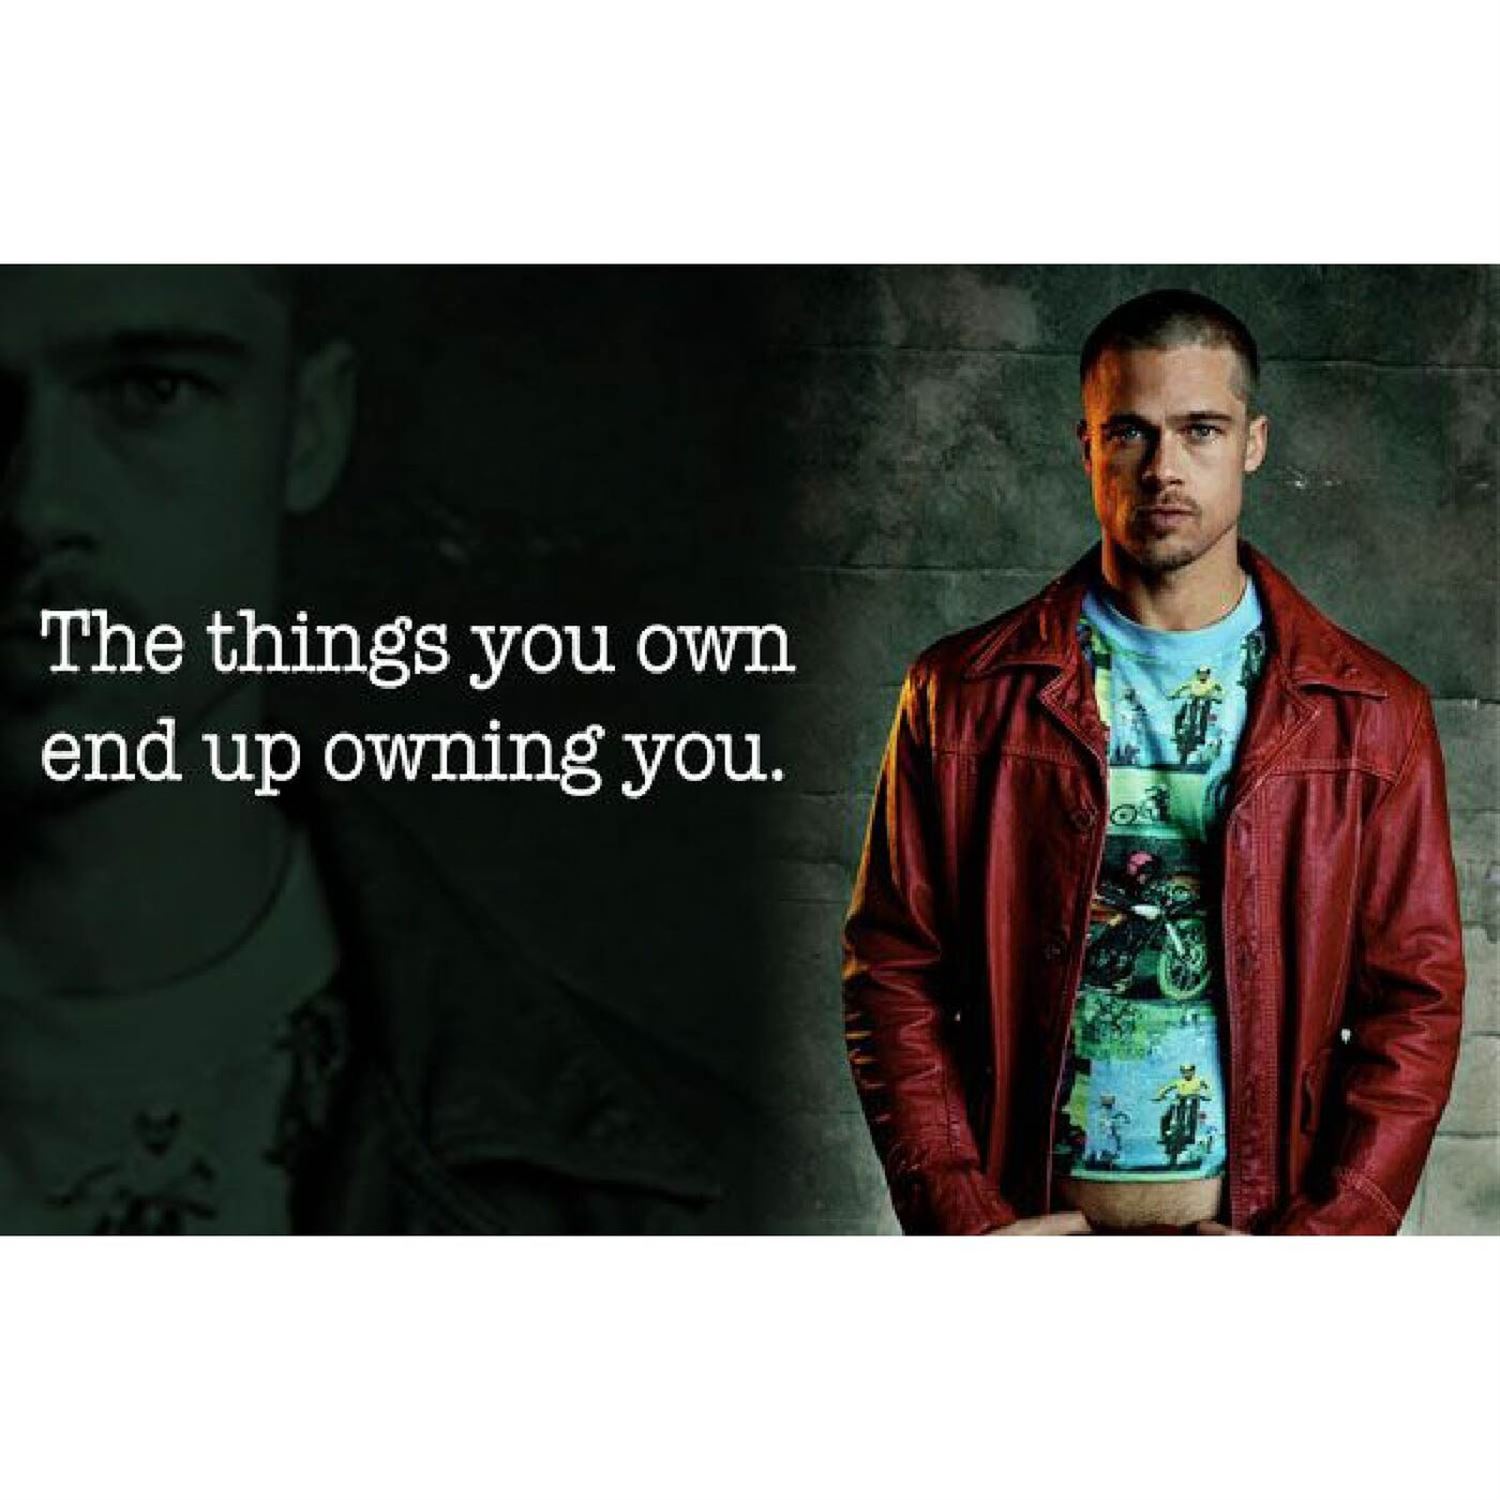 The things you own end up owning you